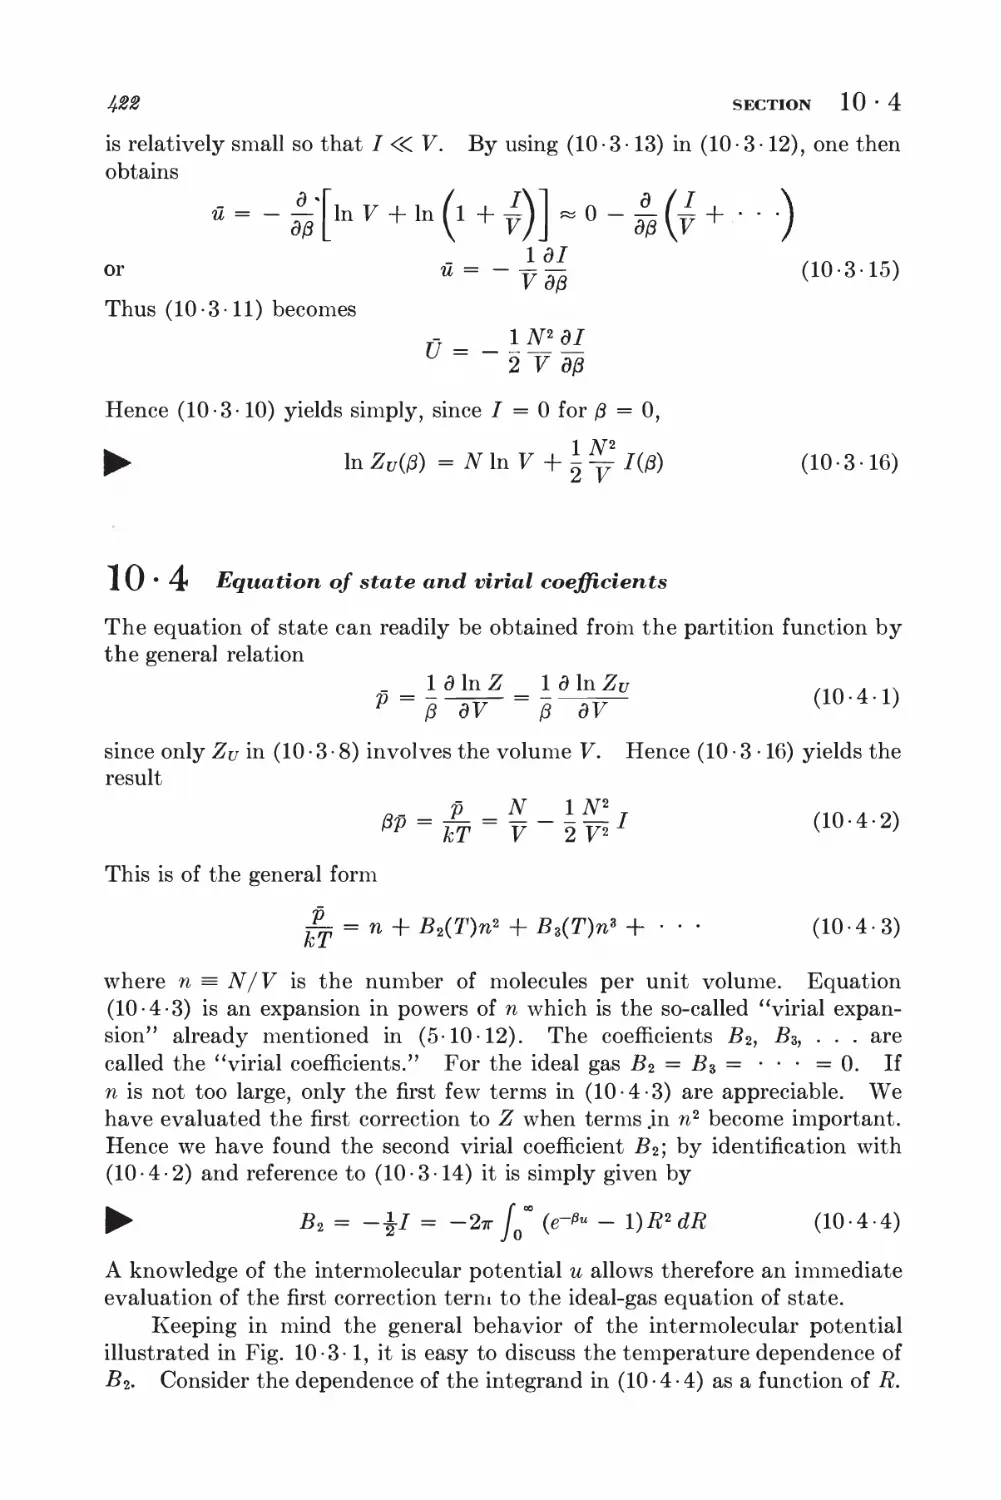 10.4 Equation of state and virial coefficients